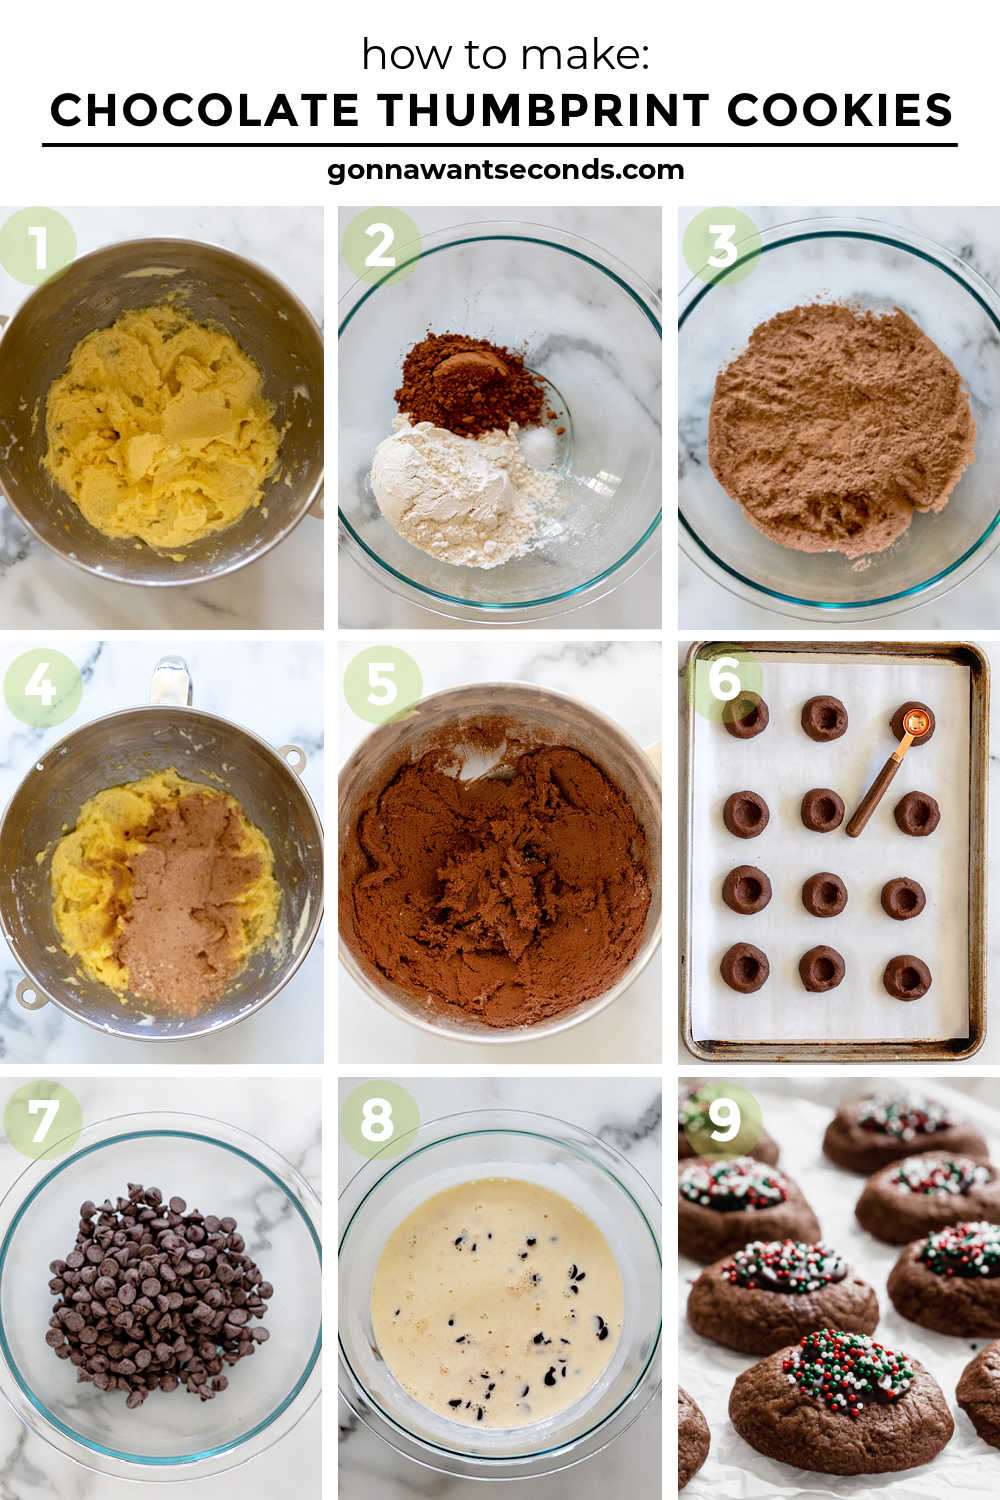 Step by step how to make Chocolate Thumbprint Cookies